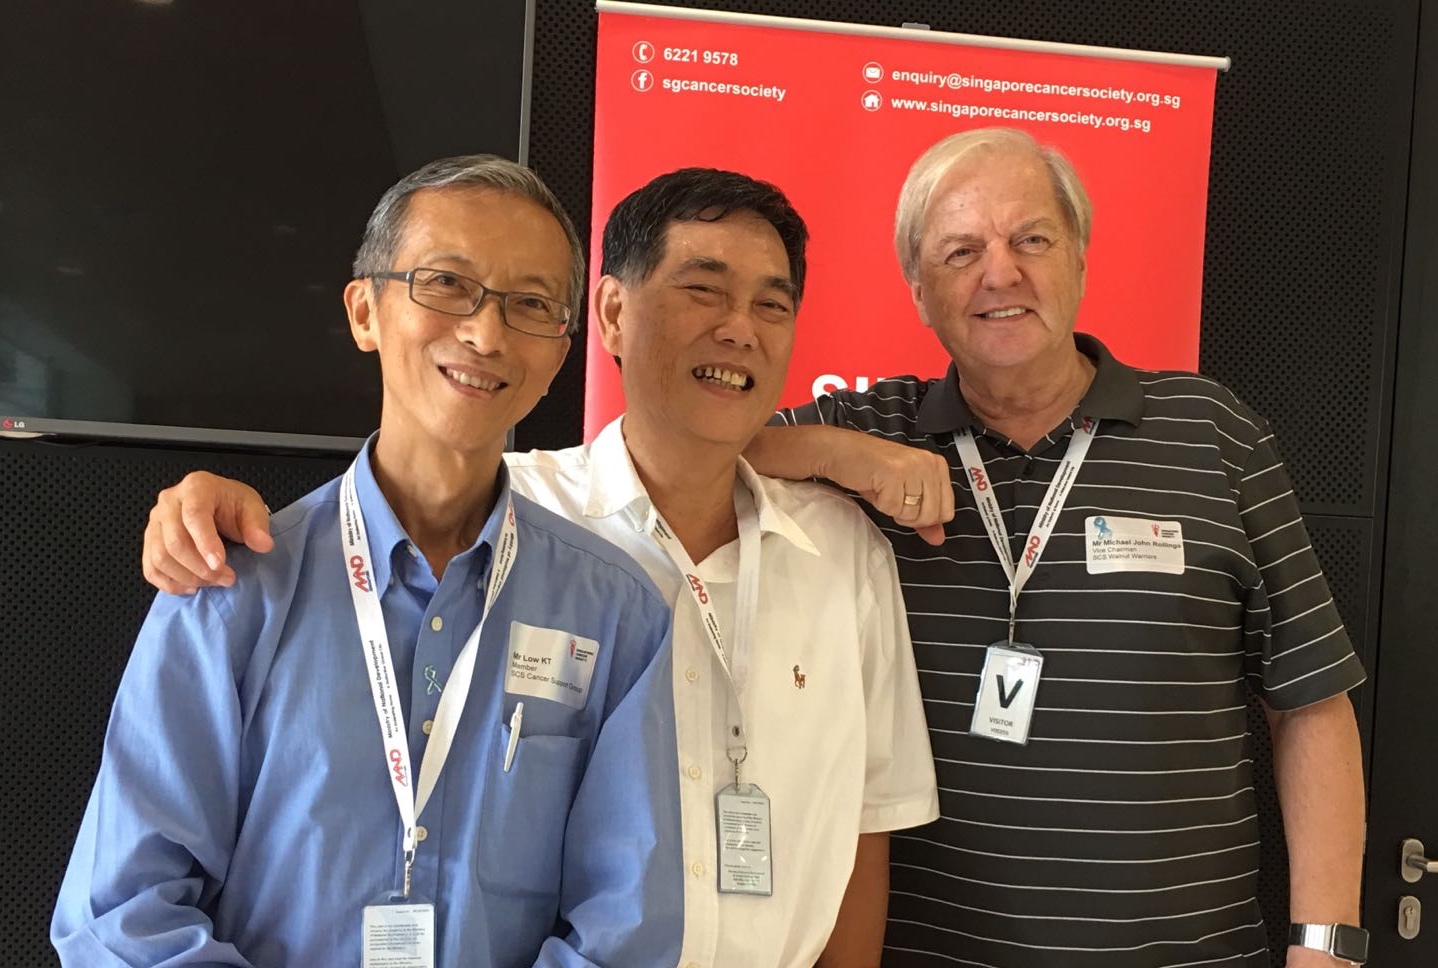 Today, Mike is an active patient ambassador with the Singapore Cancer Society's Walnut Warriors Prostate Cancer Support Group